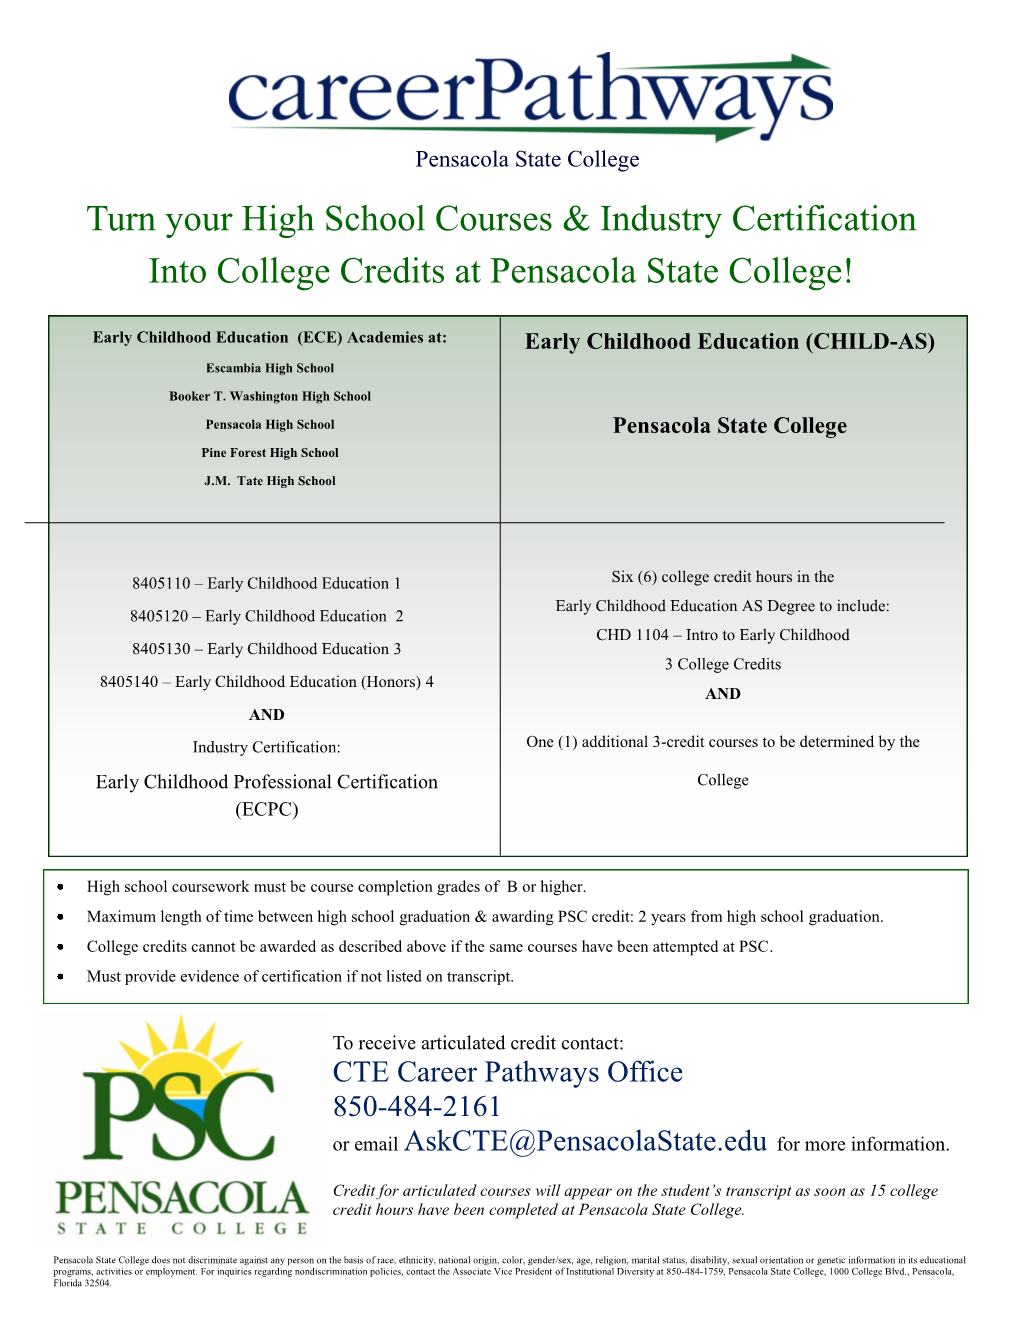 Turn Your High School Courses & Industry